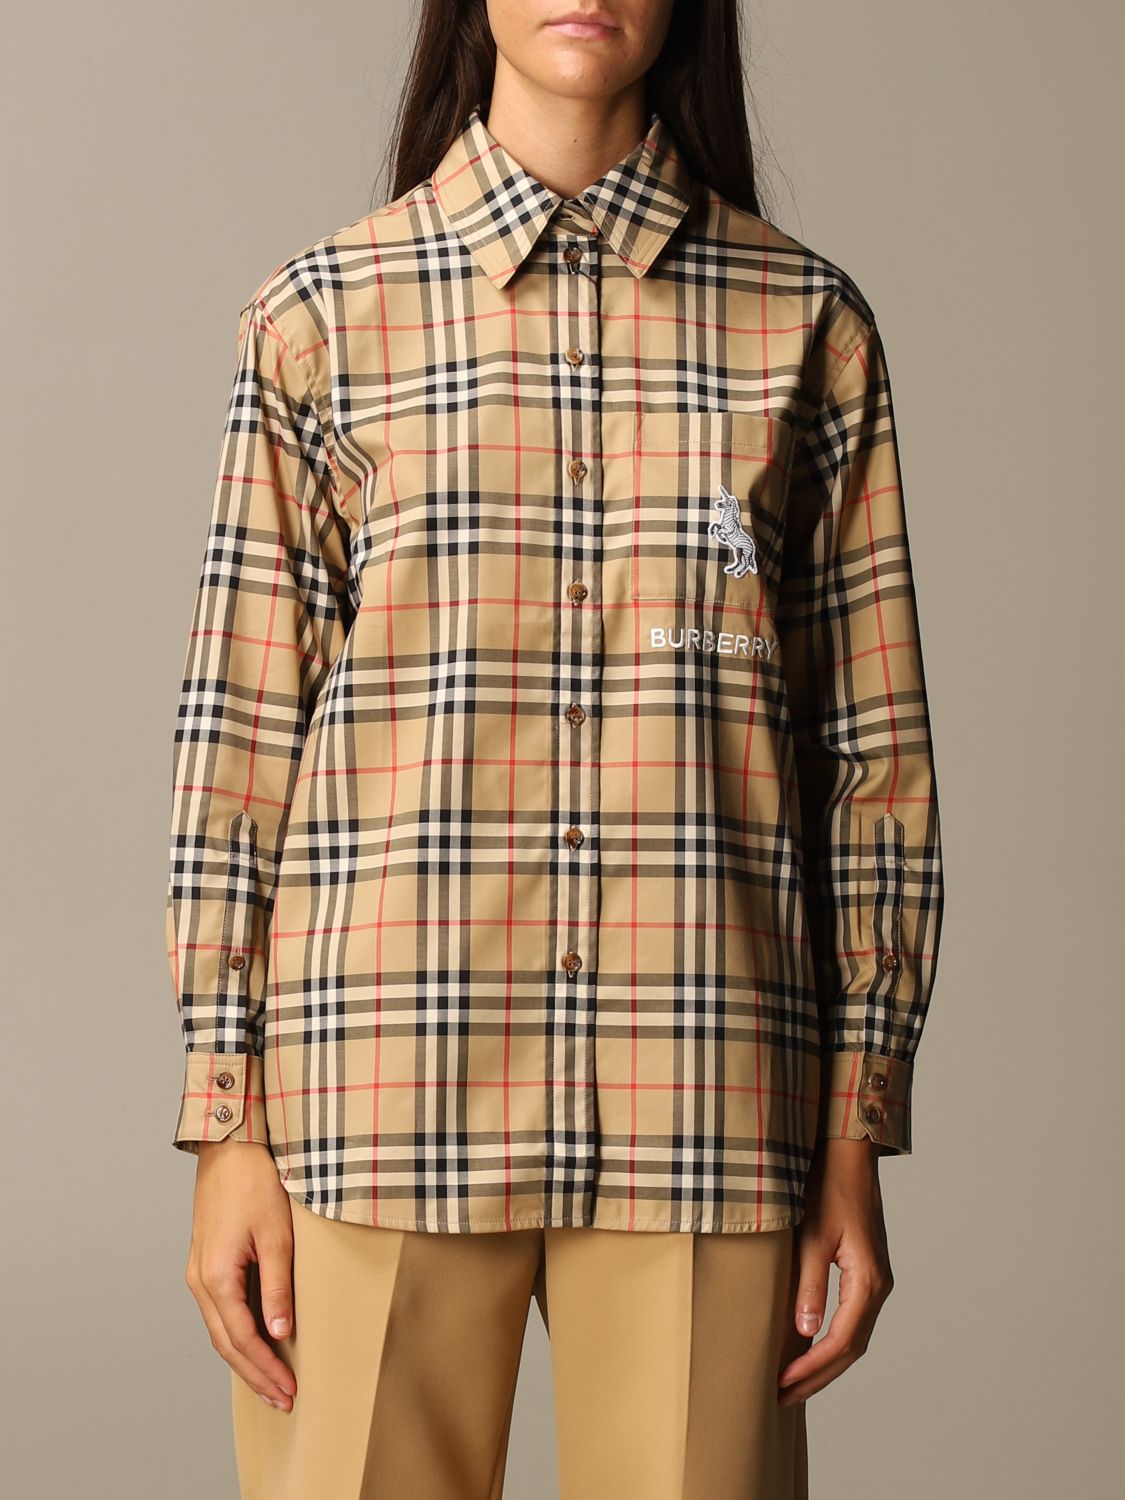 BURBERRY: Carlota oversized cotton shirt with vintage check pattern - Beige  | Burberry shirt 8032151 online on 